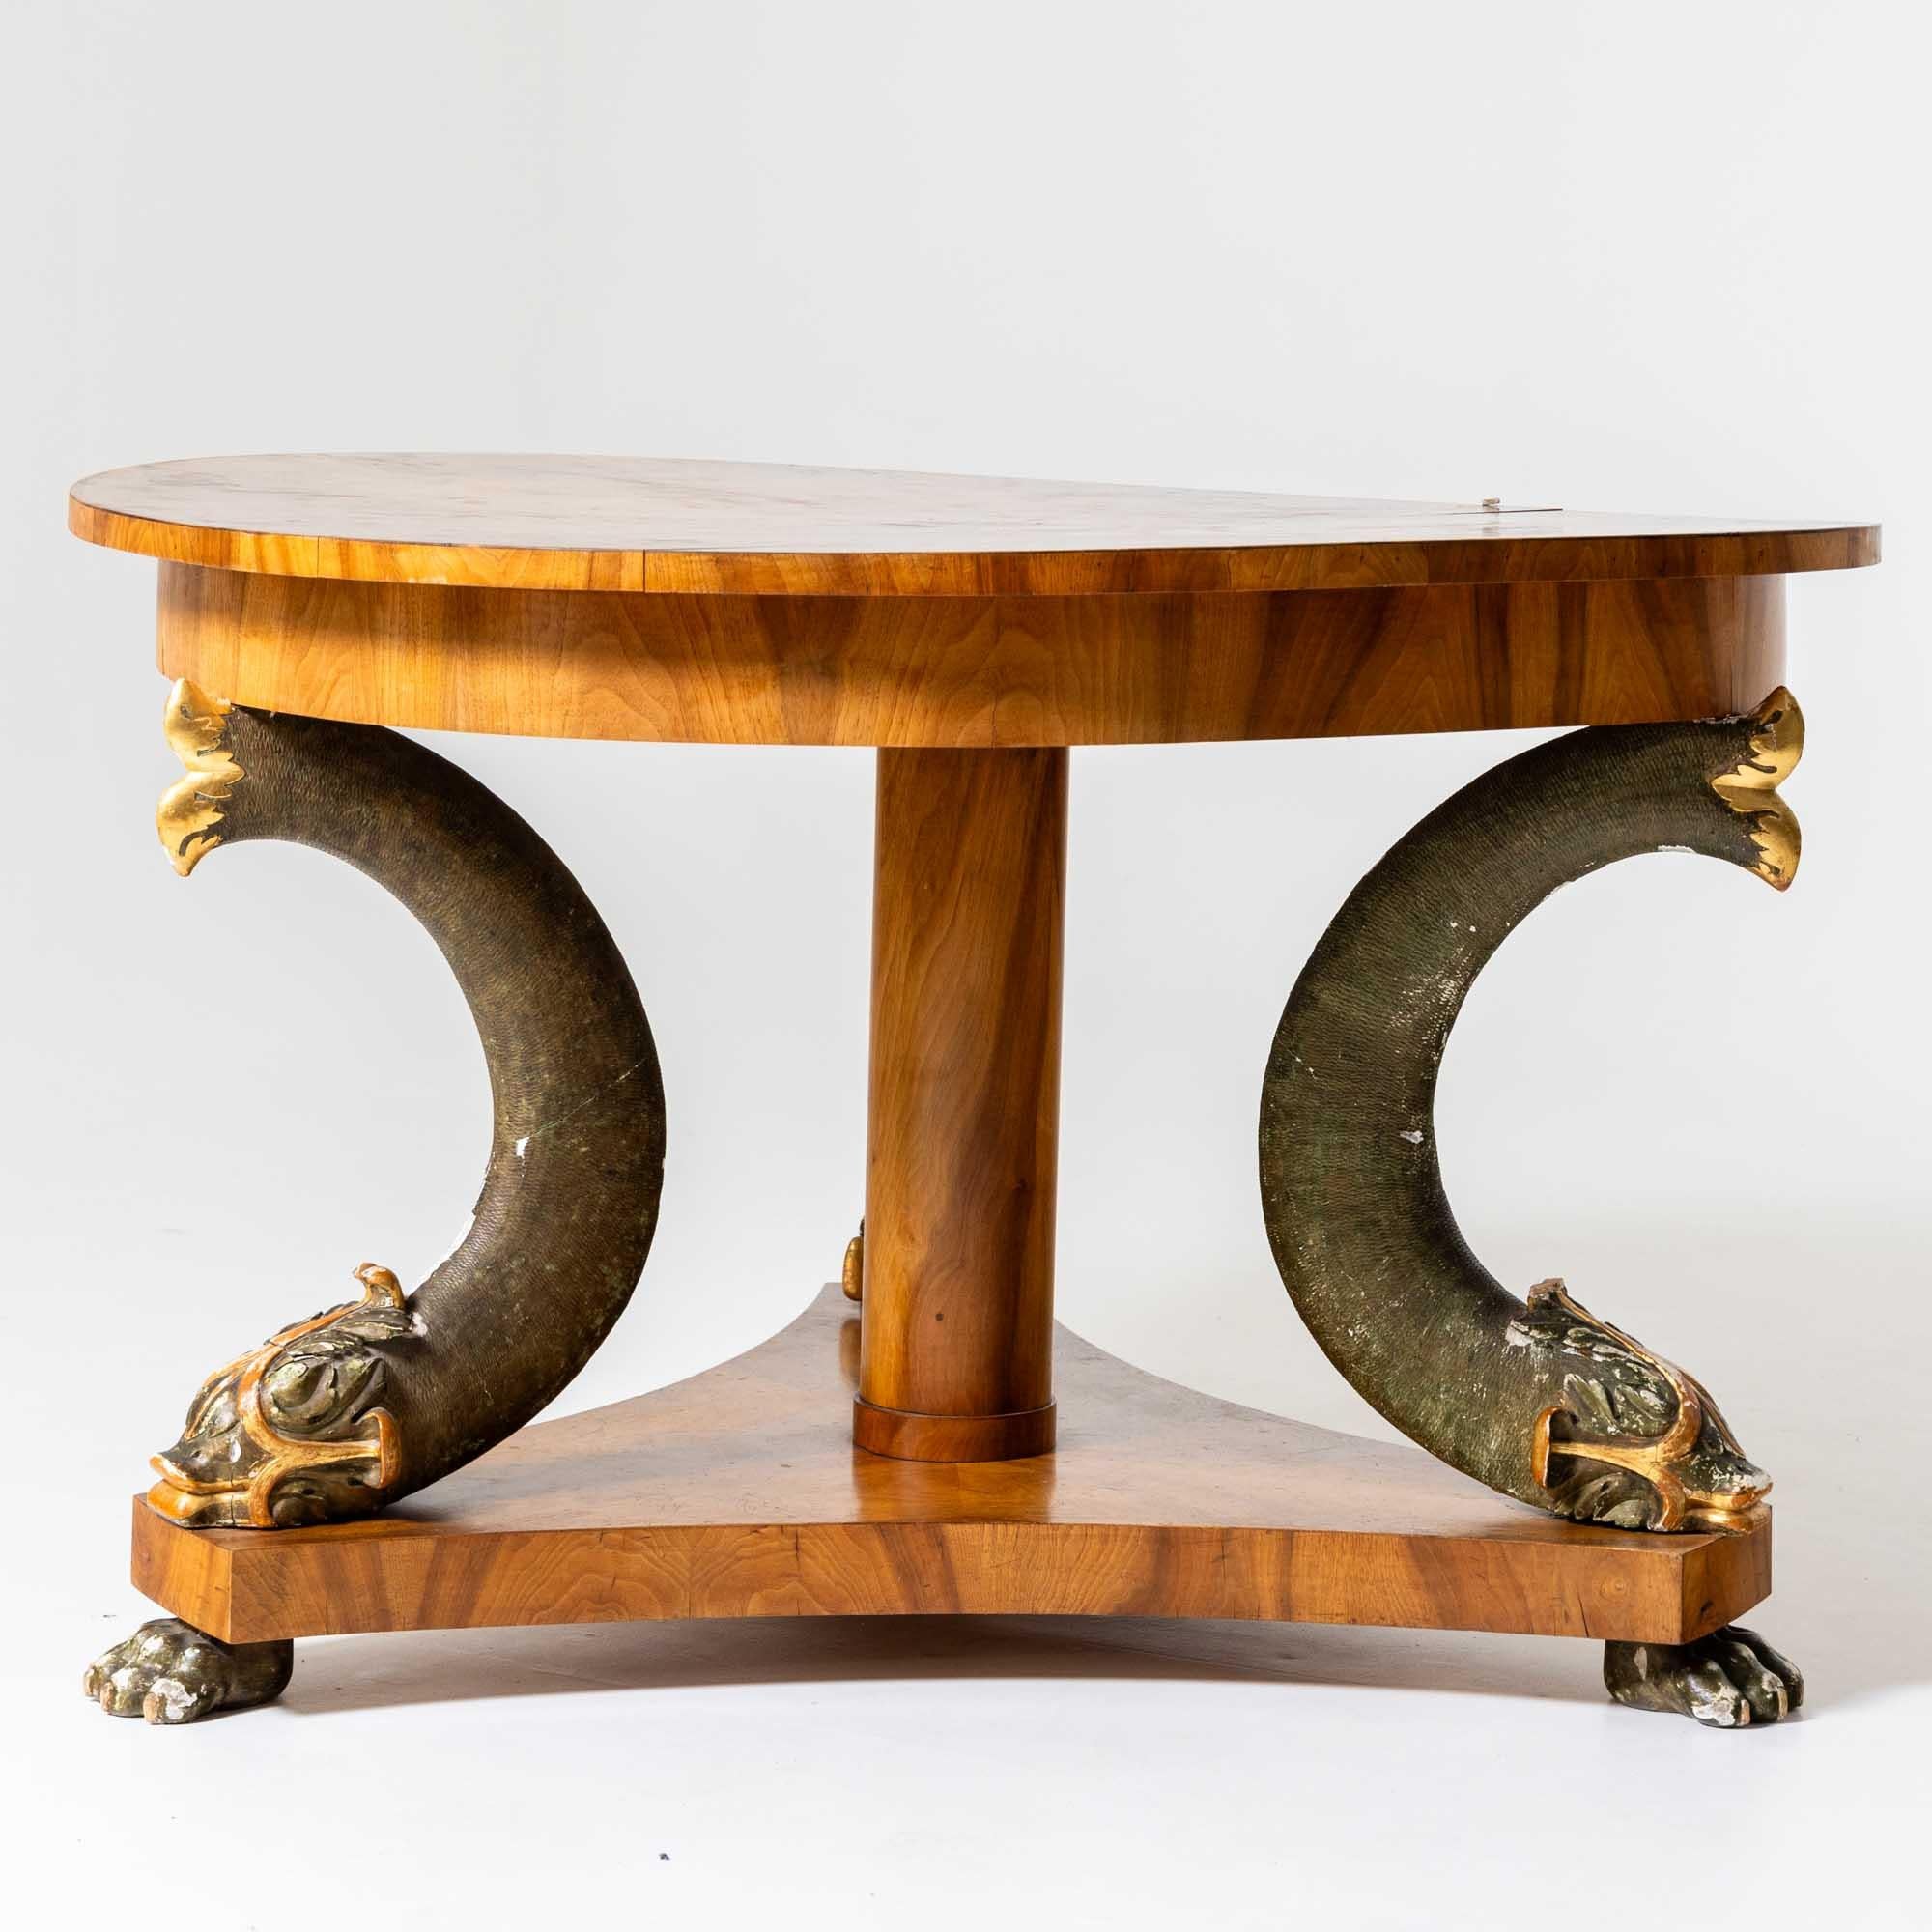 Early 19th Century Large Salon Table with Walnut Veneer and carved Dolphins, Germany circa 1820